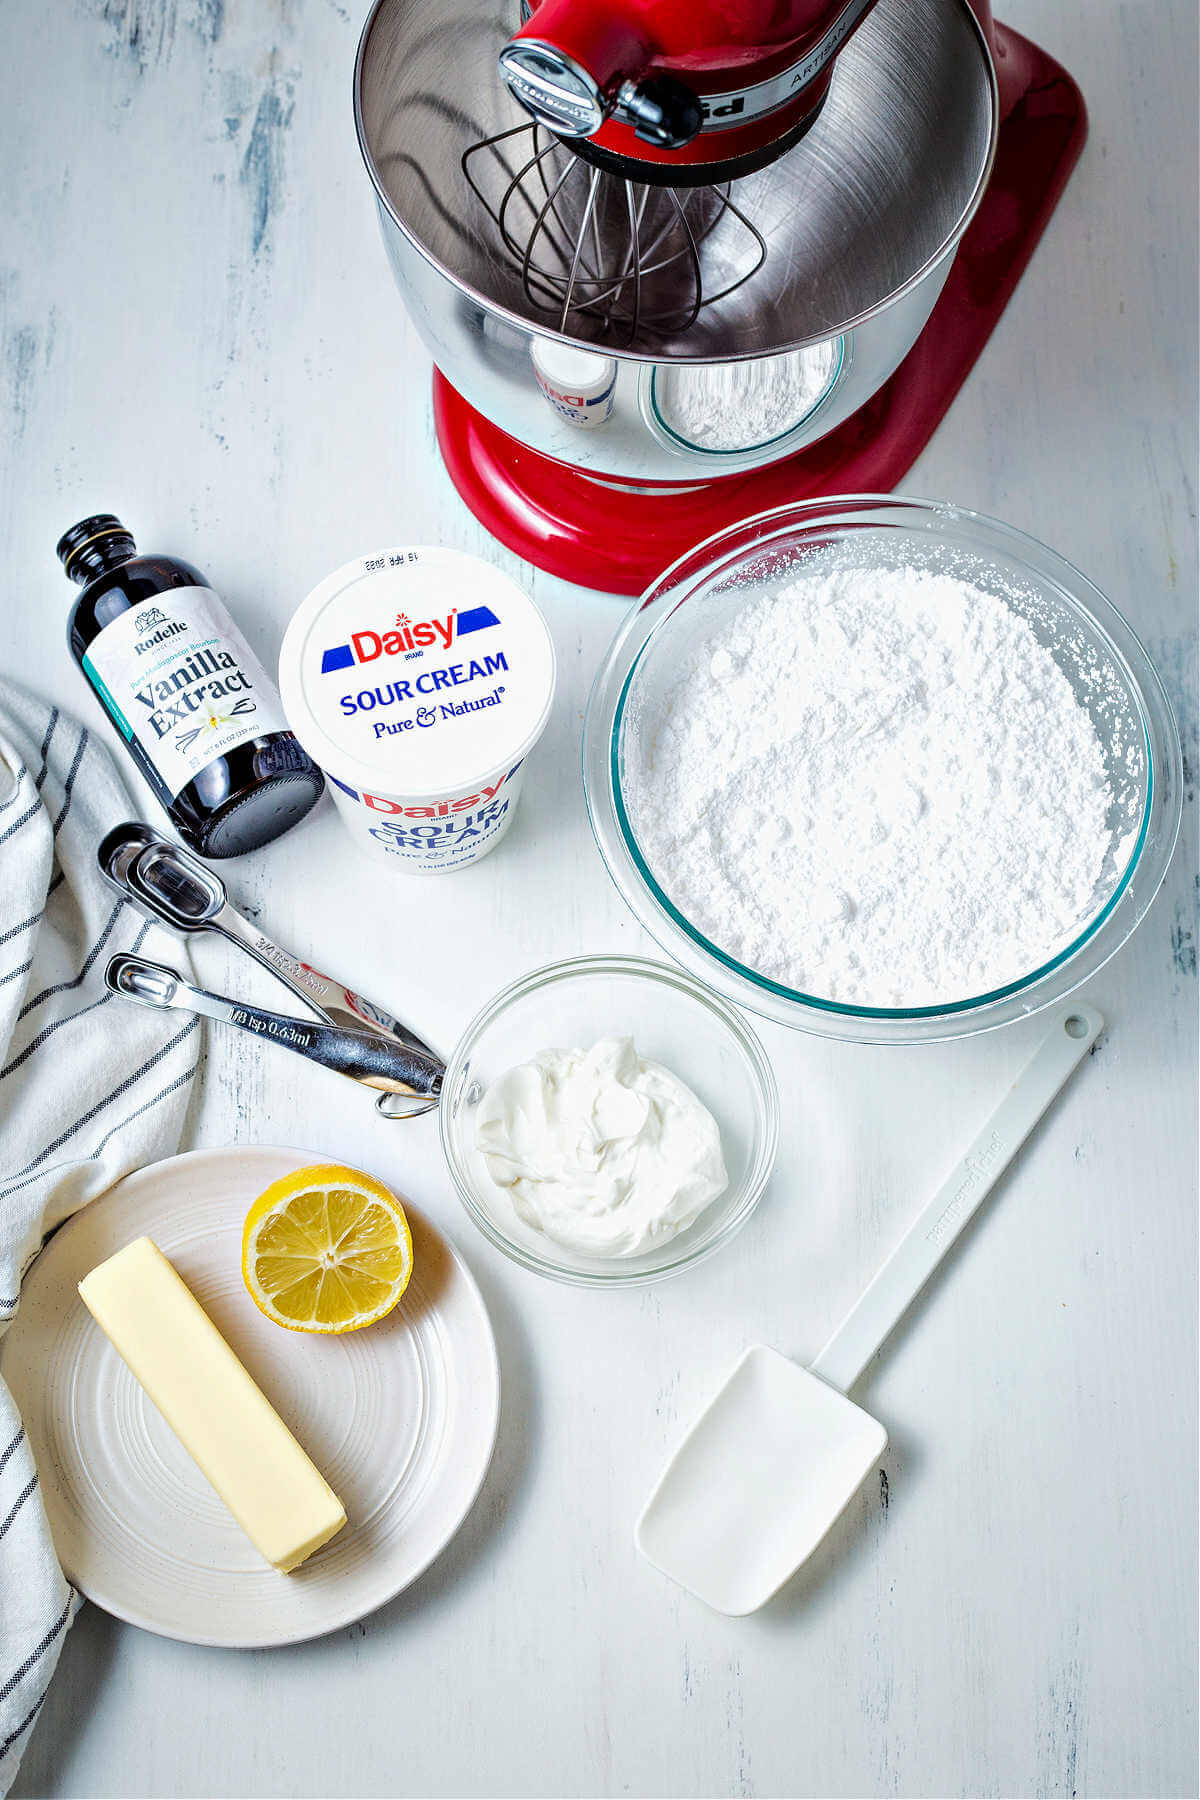 ingredients for sour cream frosting on a kitchen counter: butter, lemon, vanilla, sour cream, and powdered sugar.